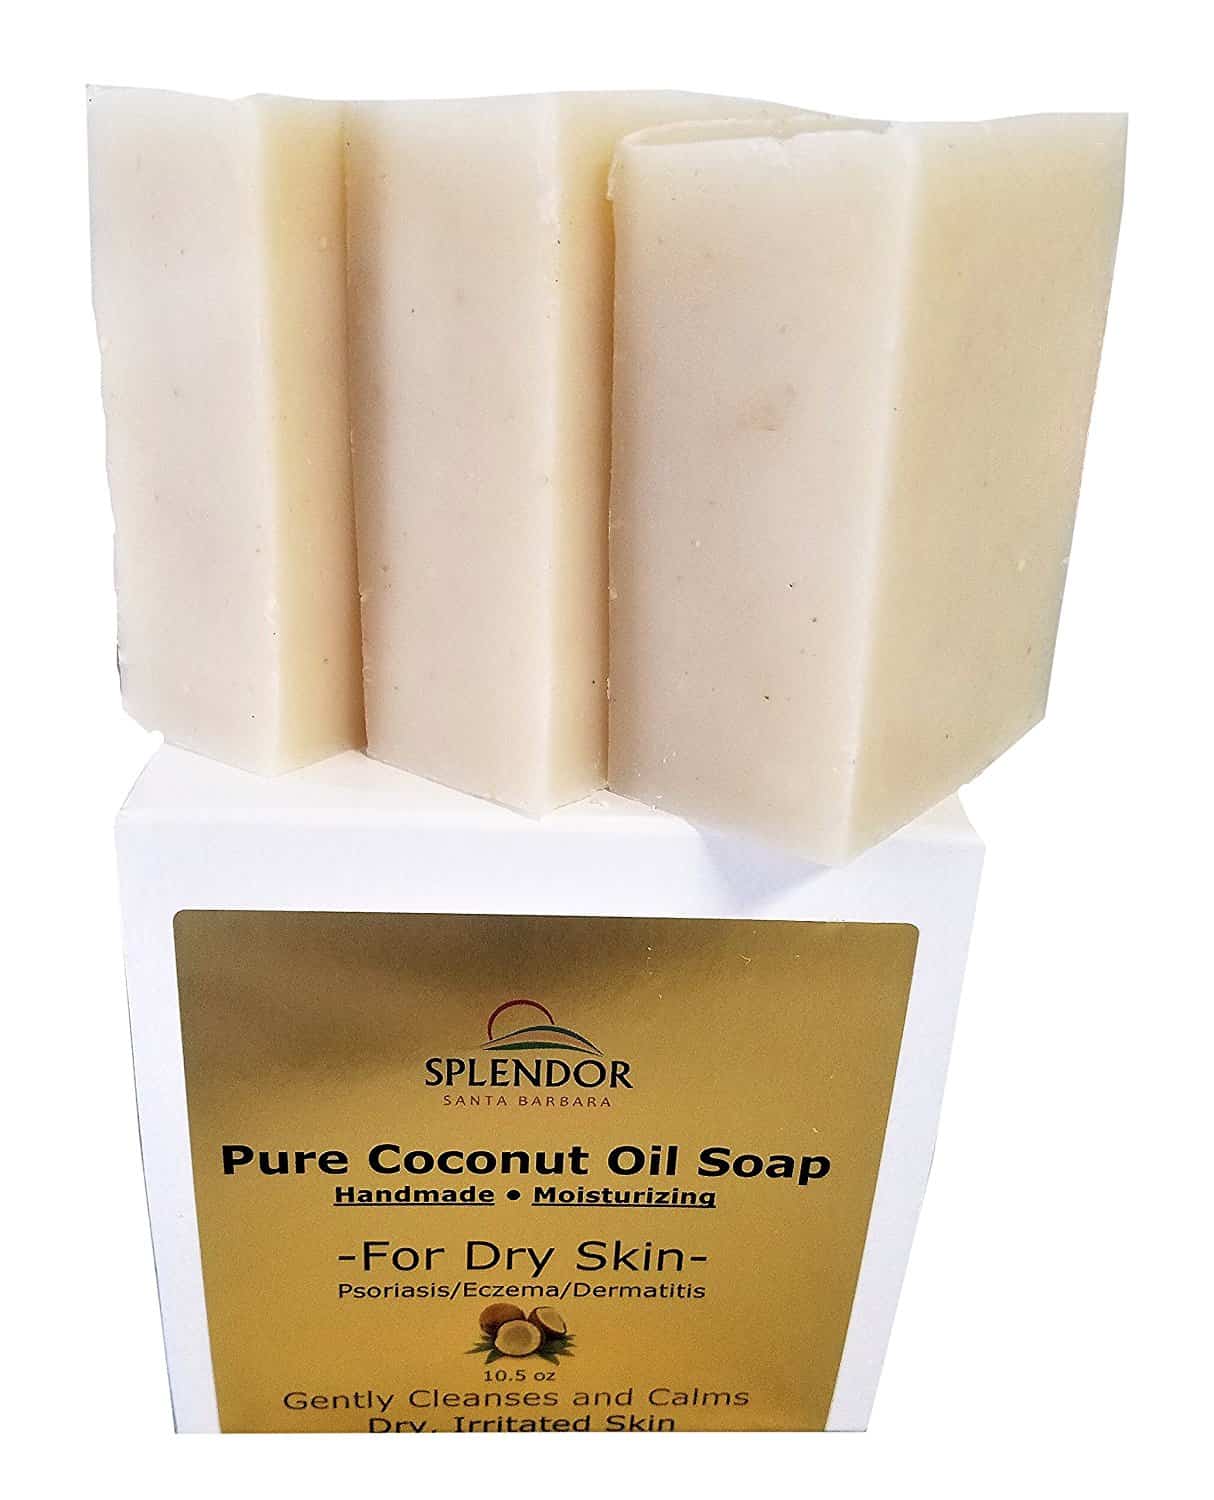 Whats the Best Soap for Dry Skin?